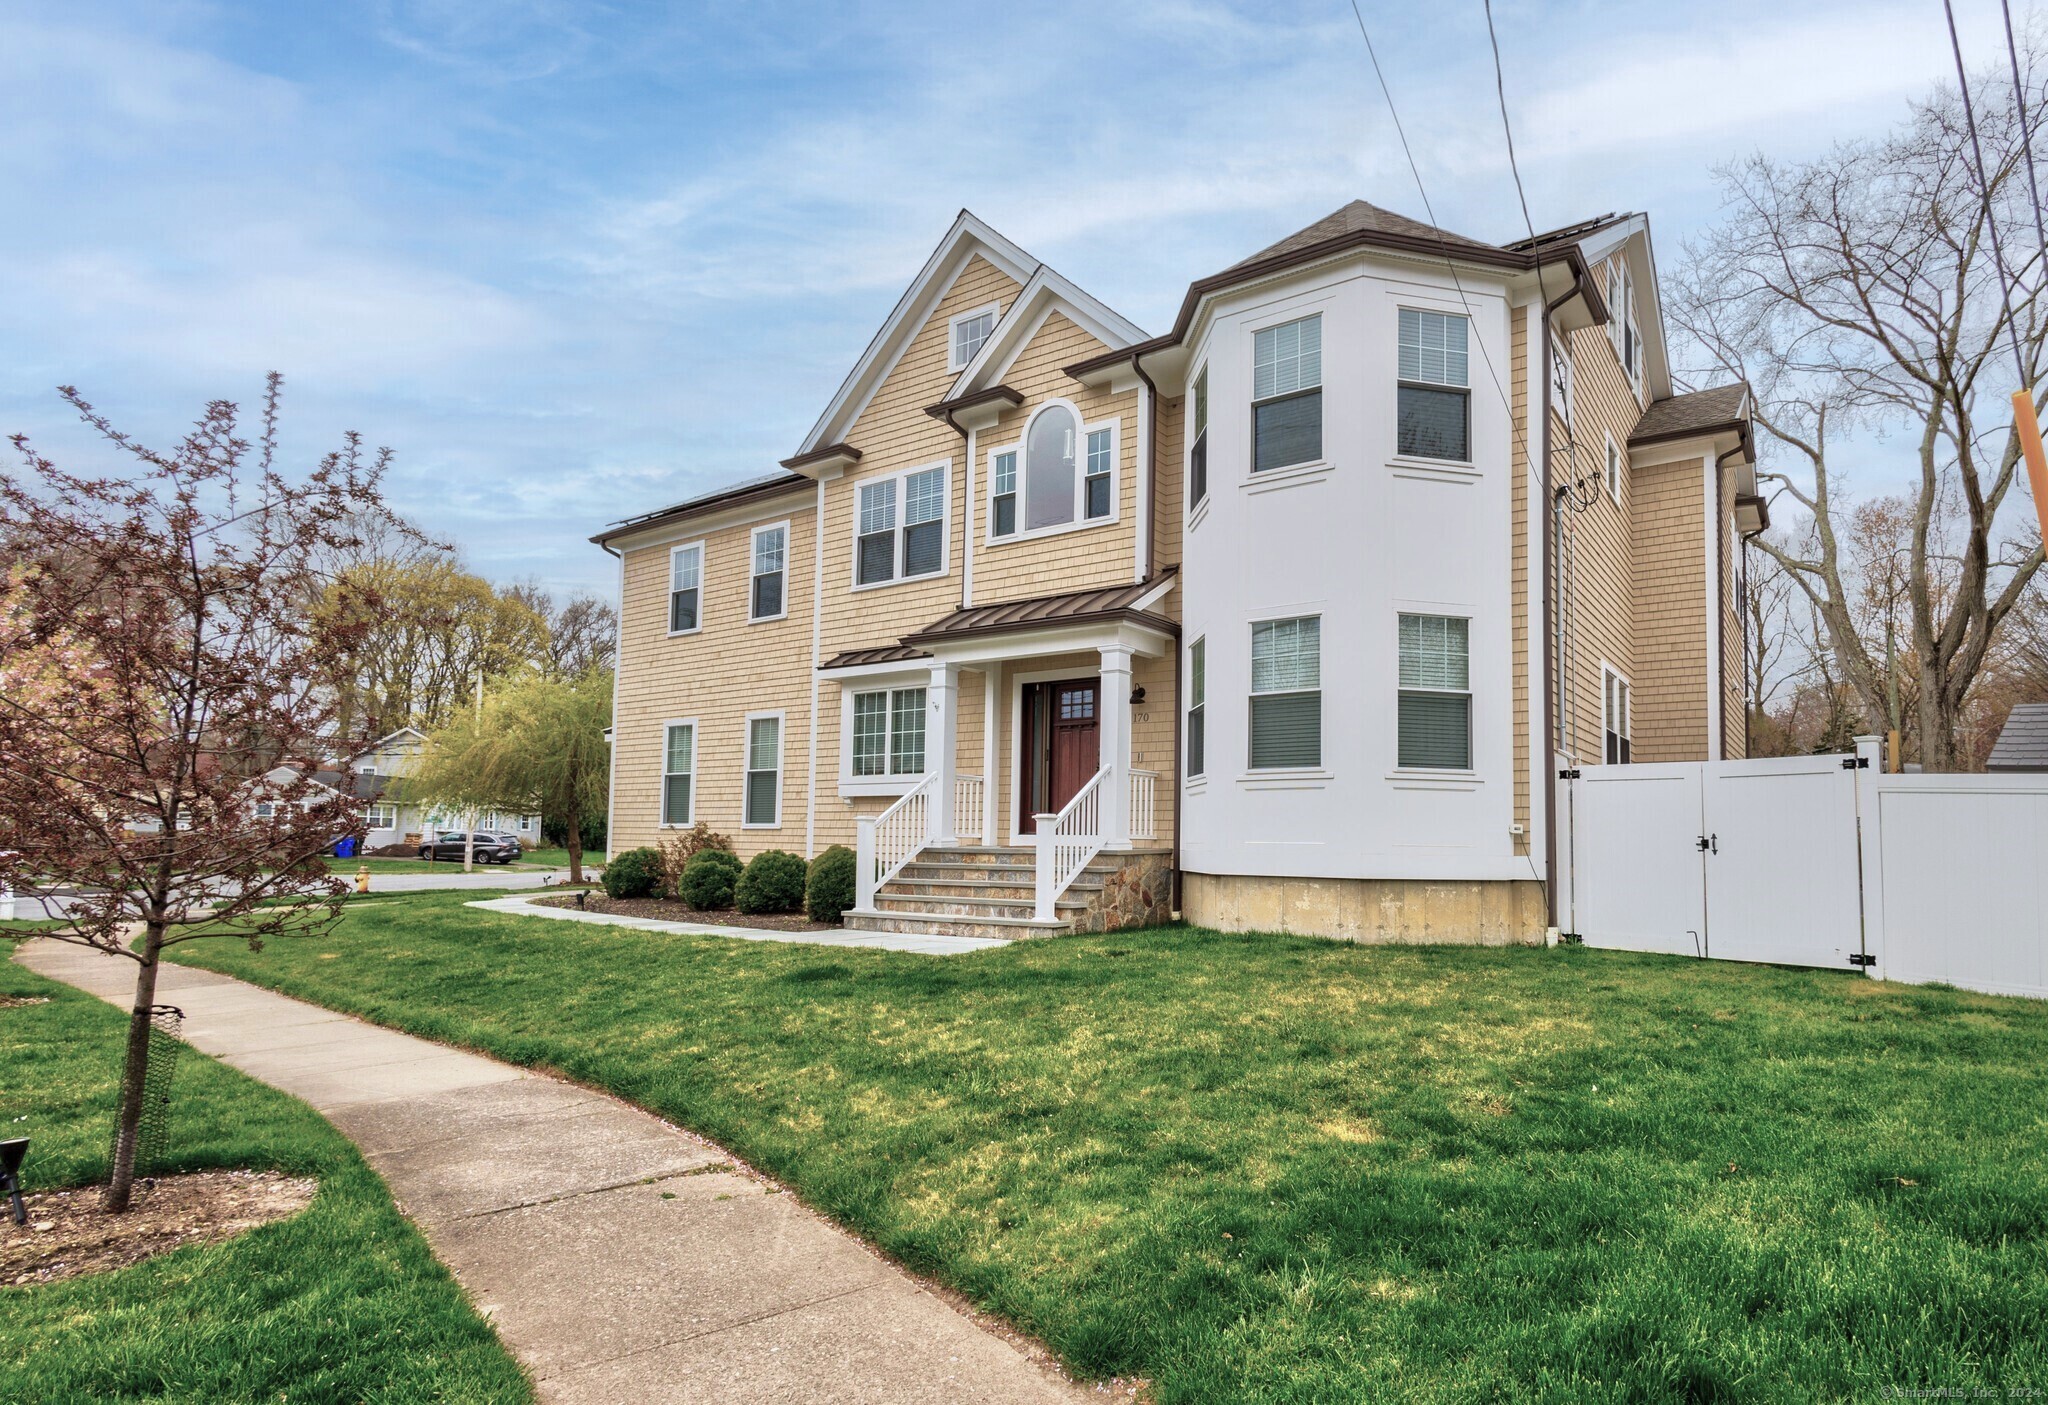 Welcome to this charming colonial nestled in the University area of Fairfield!